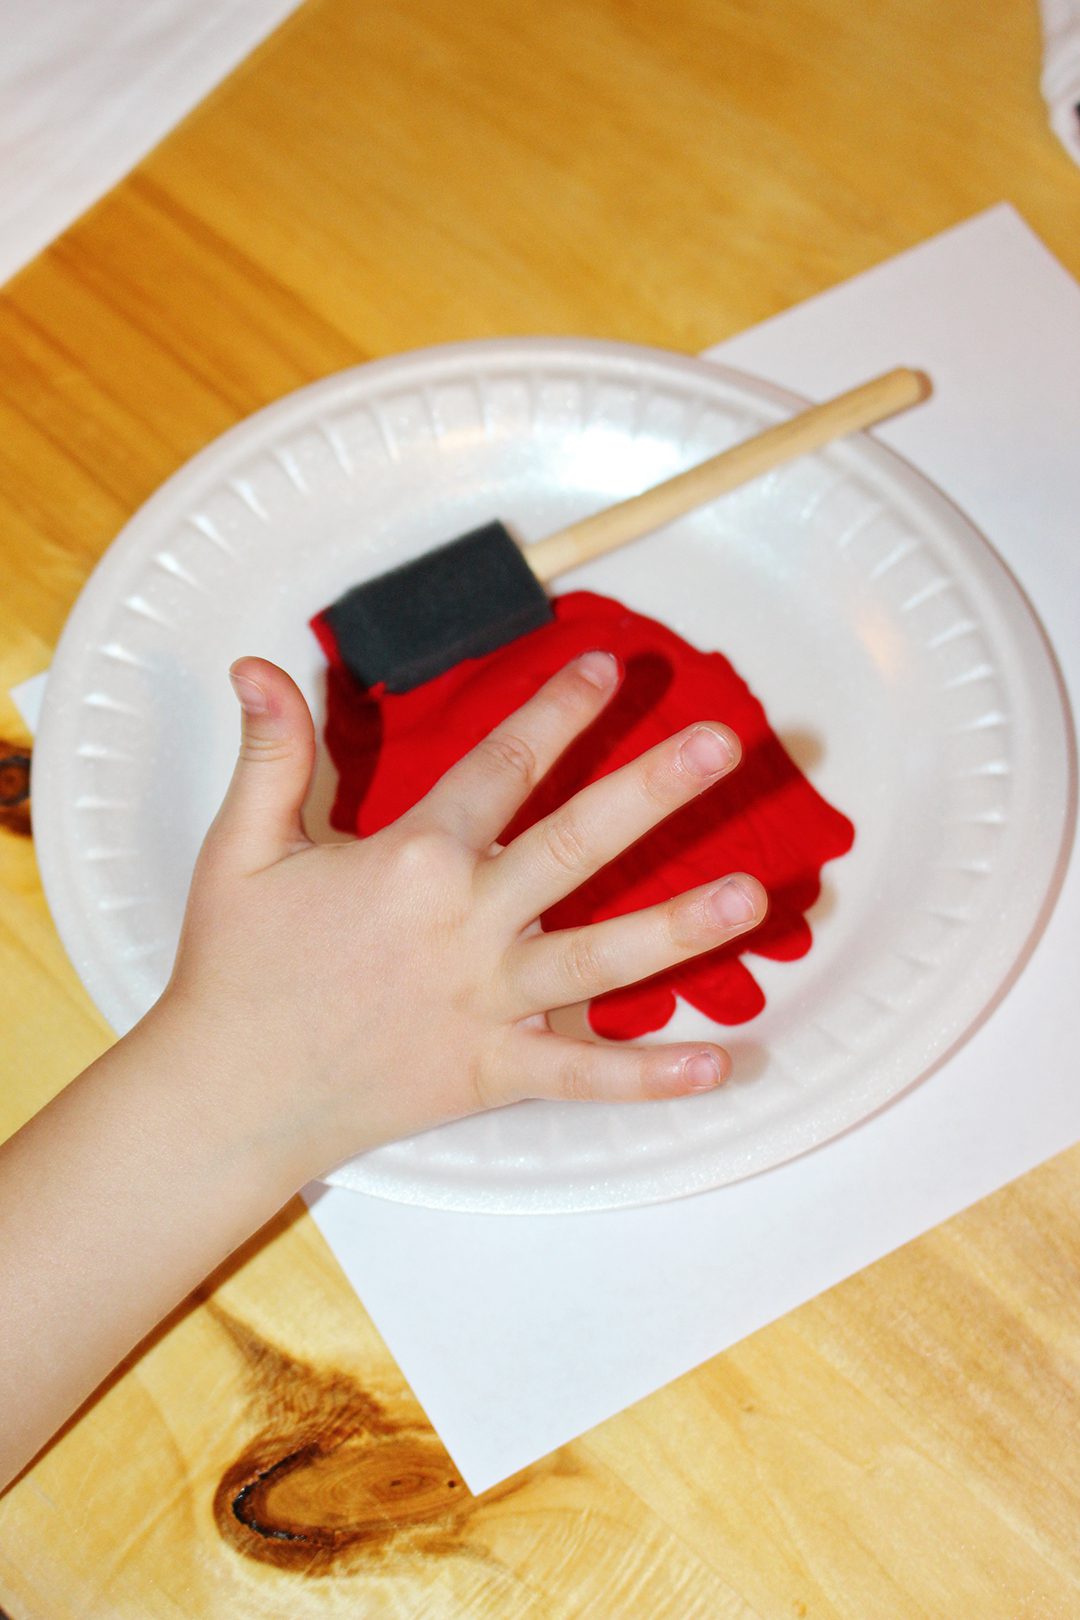 A child touching red paint spread on a plastic plate with a sponge brush.